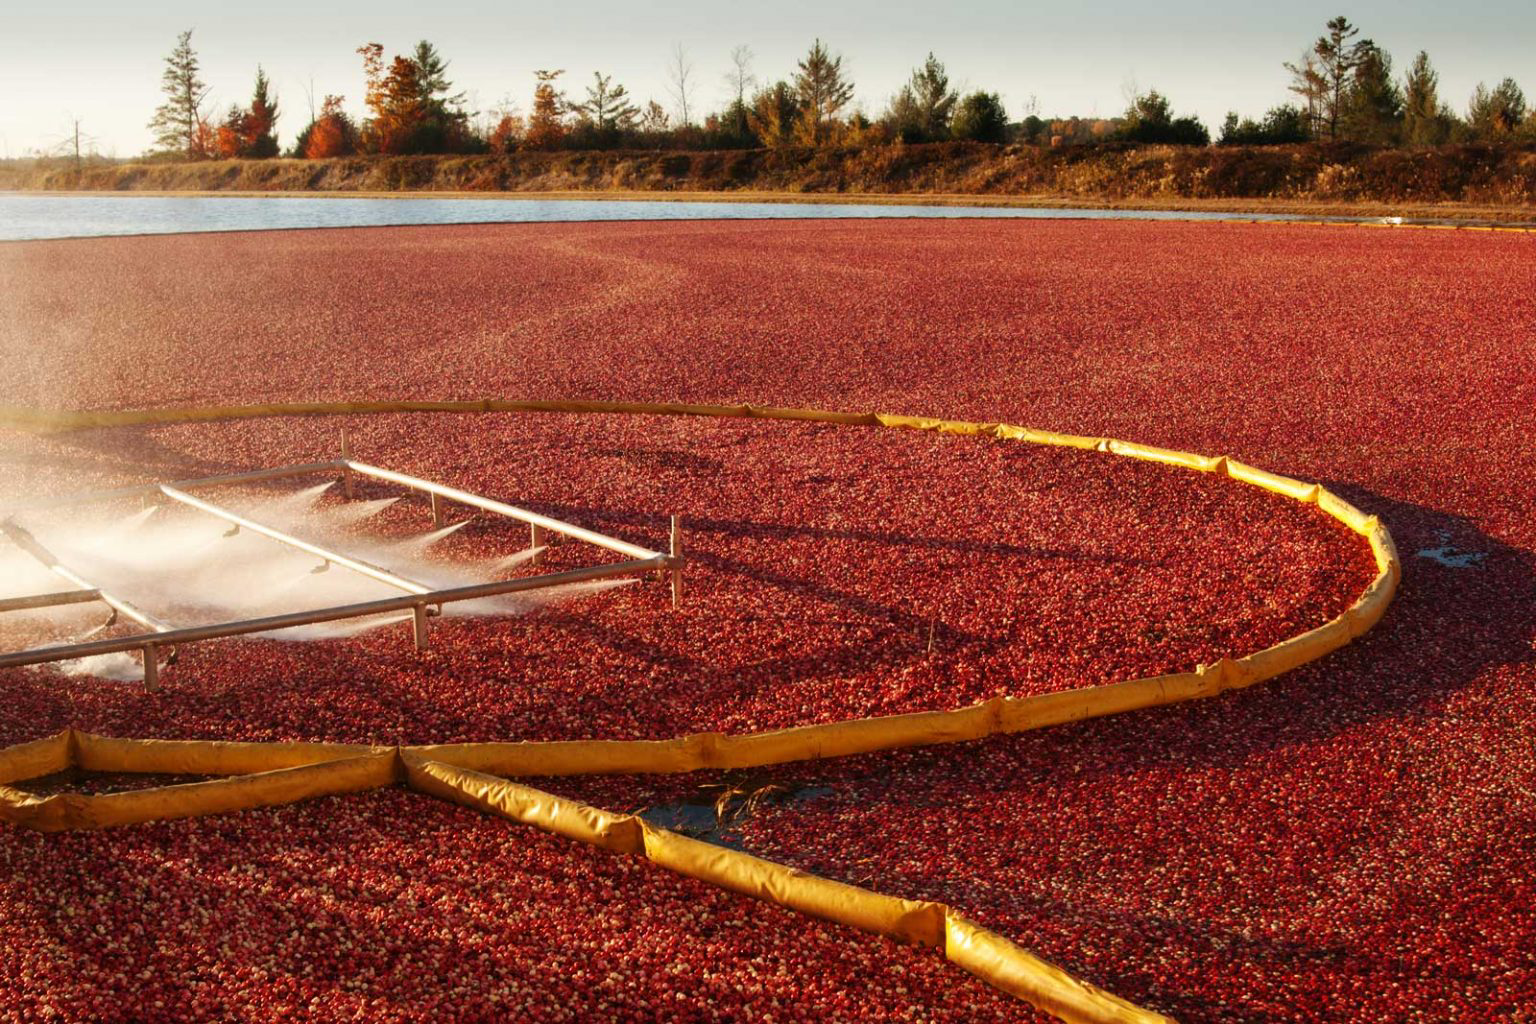 Cranberries floating in a bog as they are being harvested.